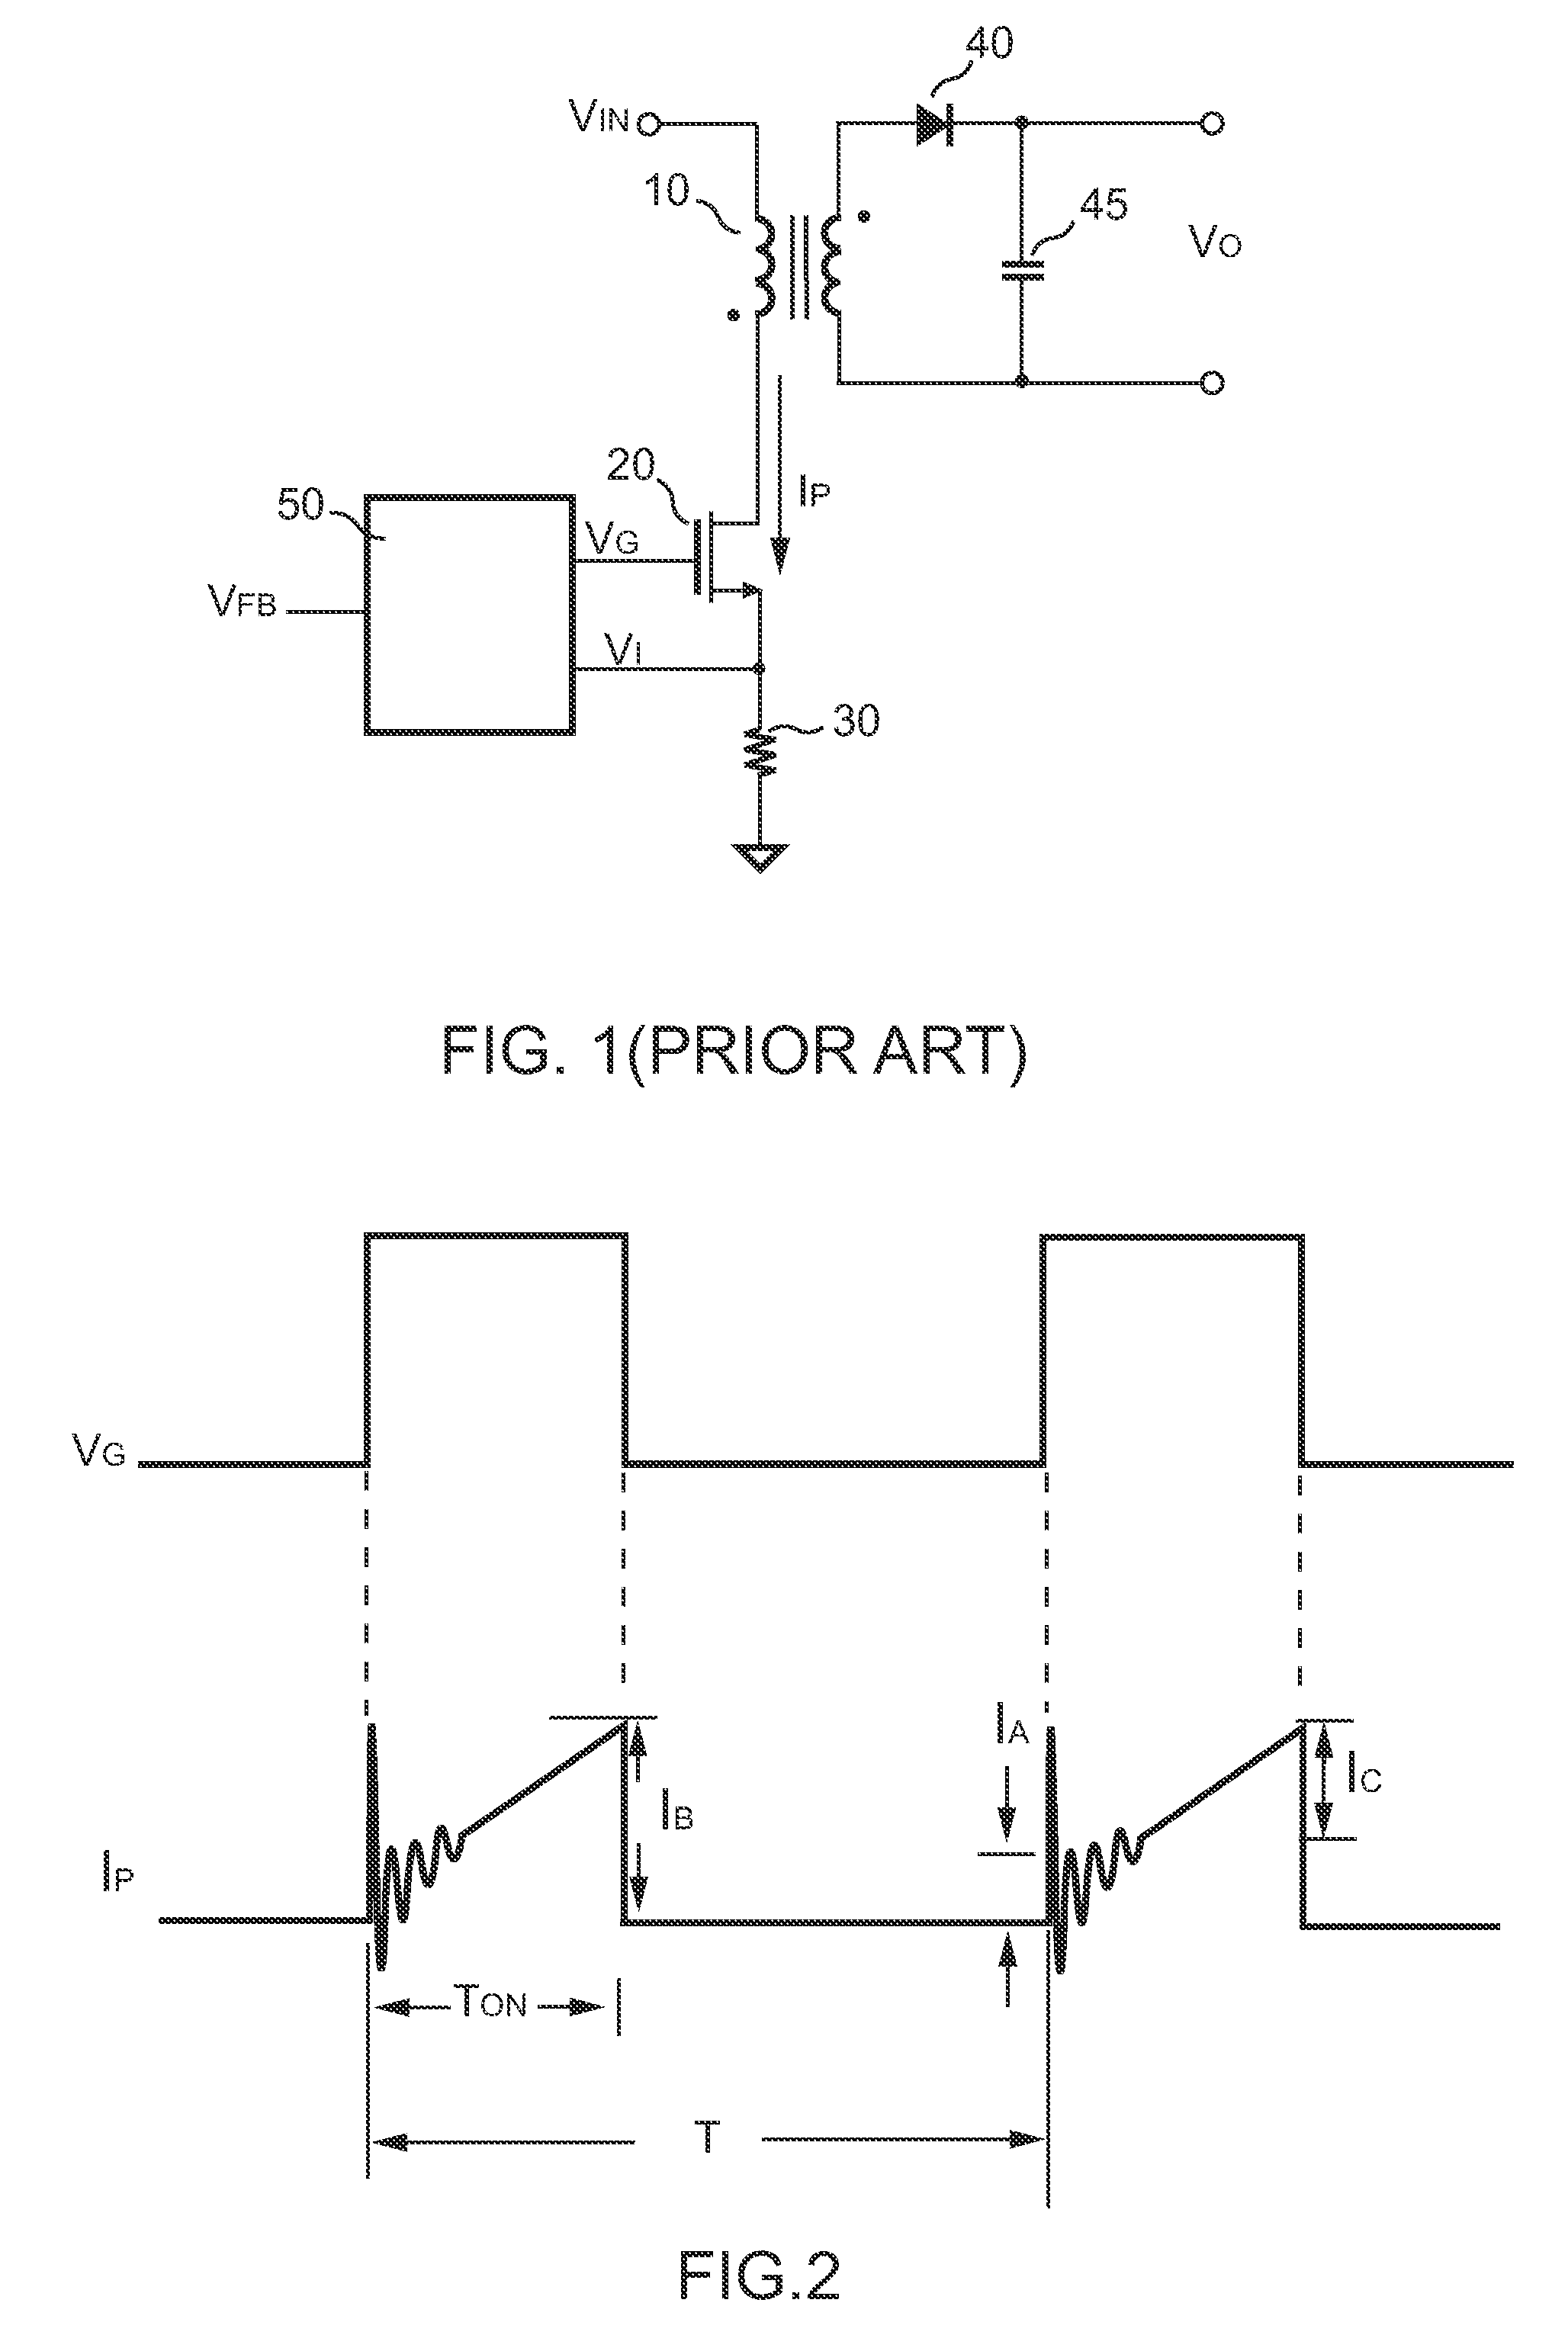 Method and apparatus for measuring the switching current of power converter operated at continuous current mode